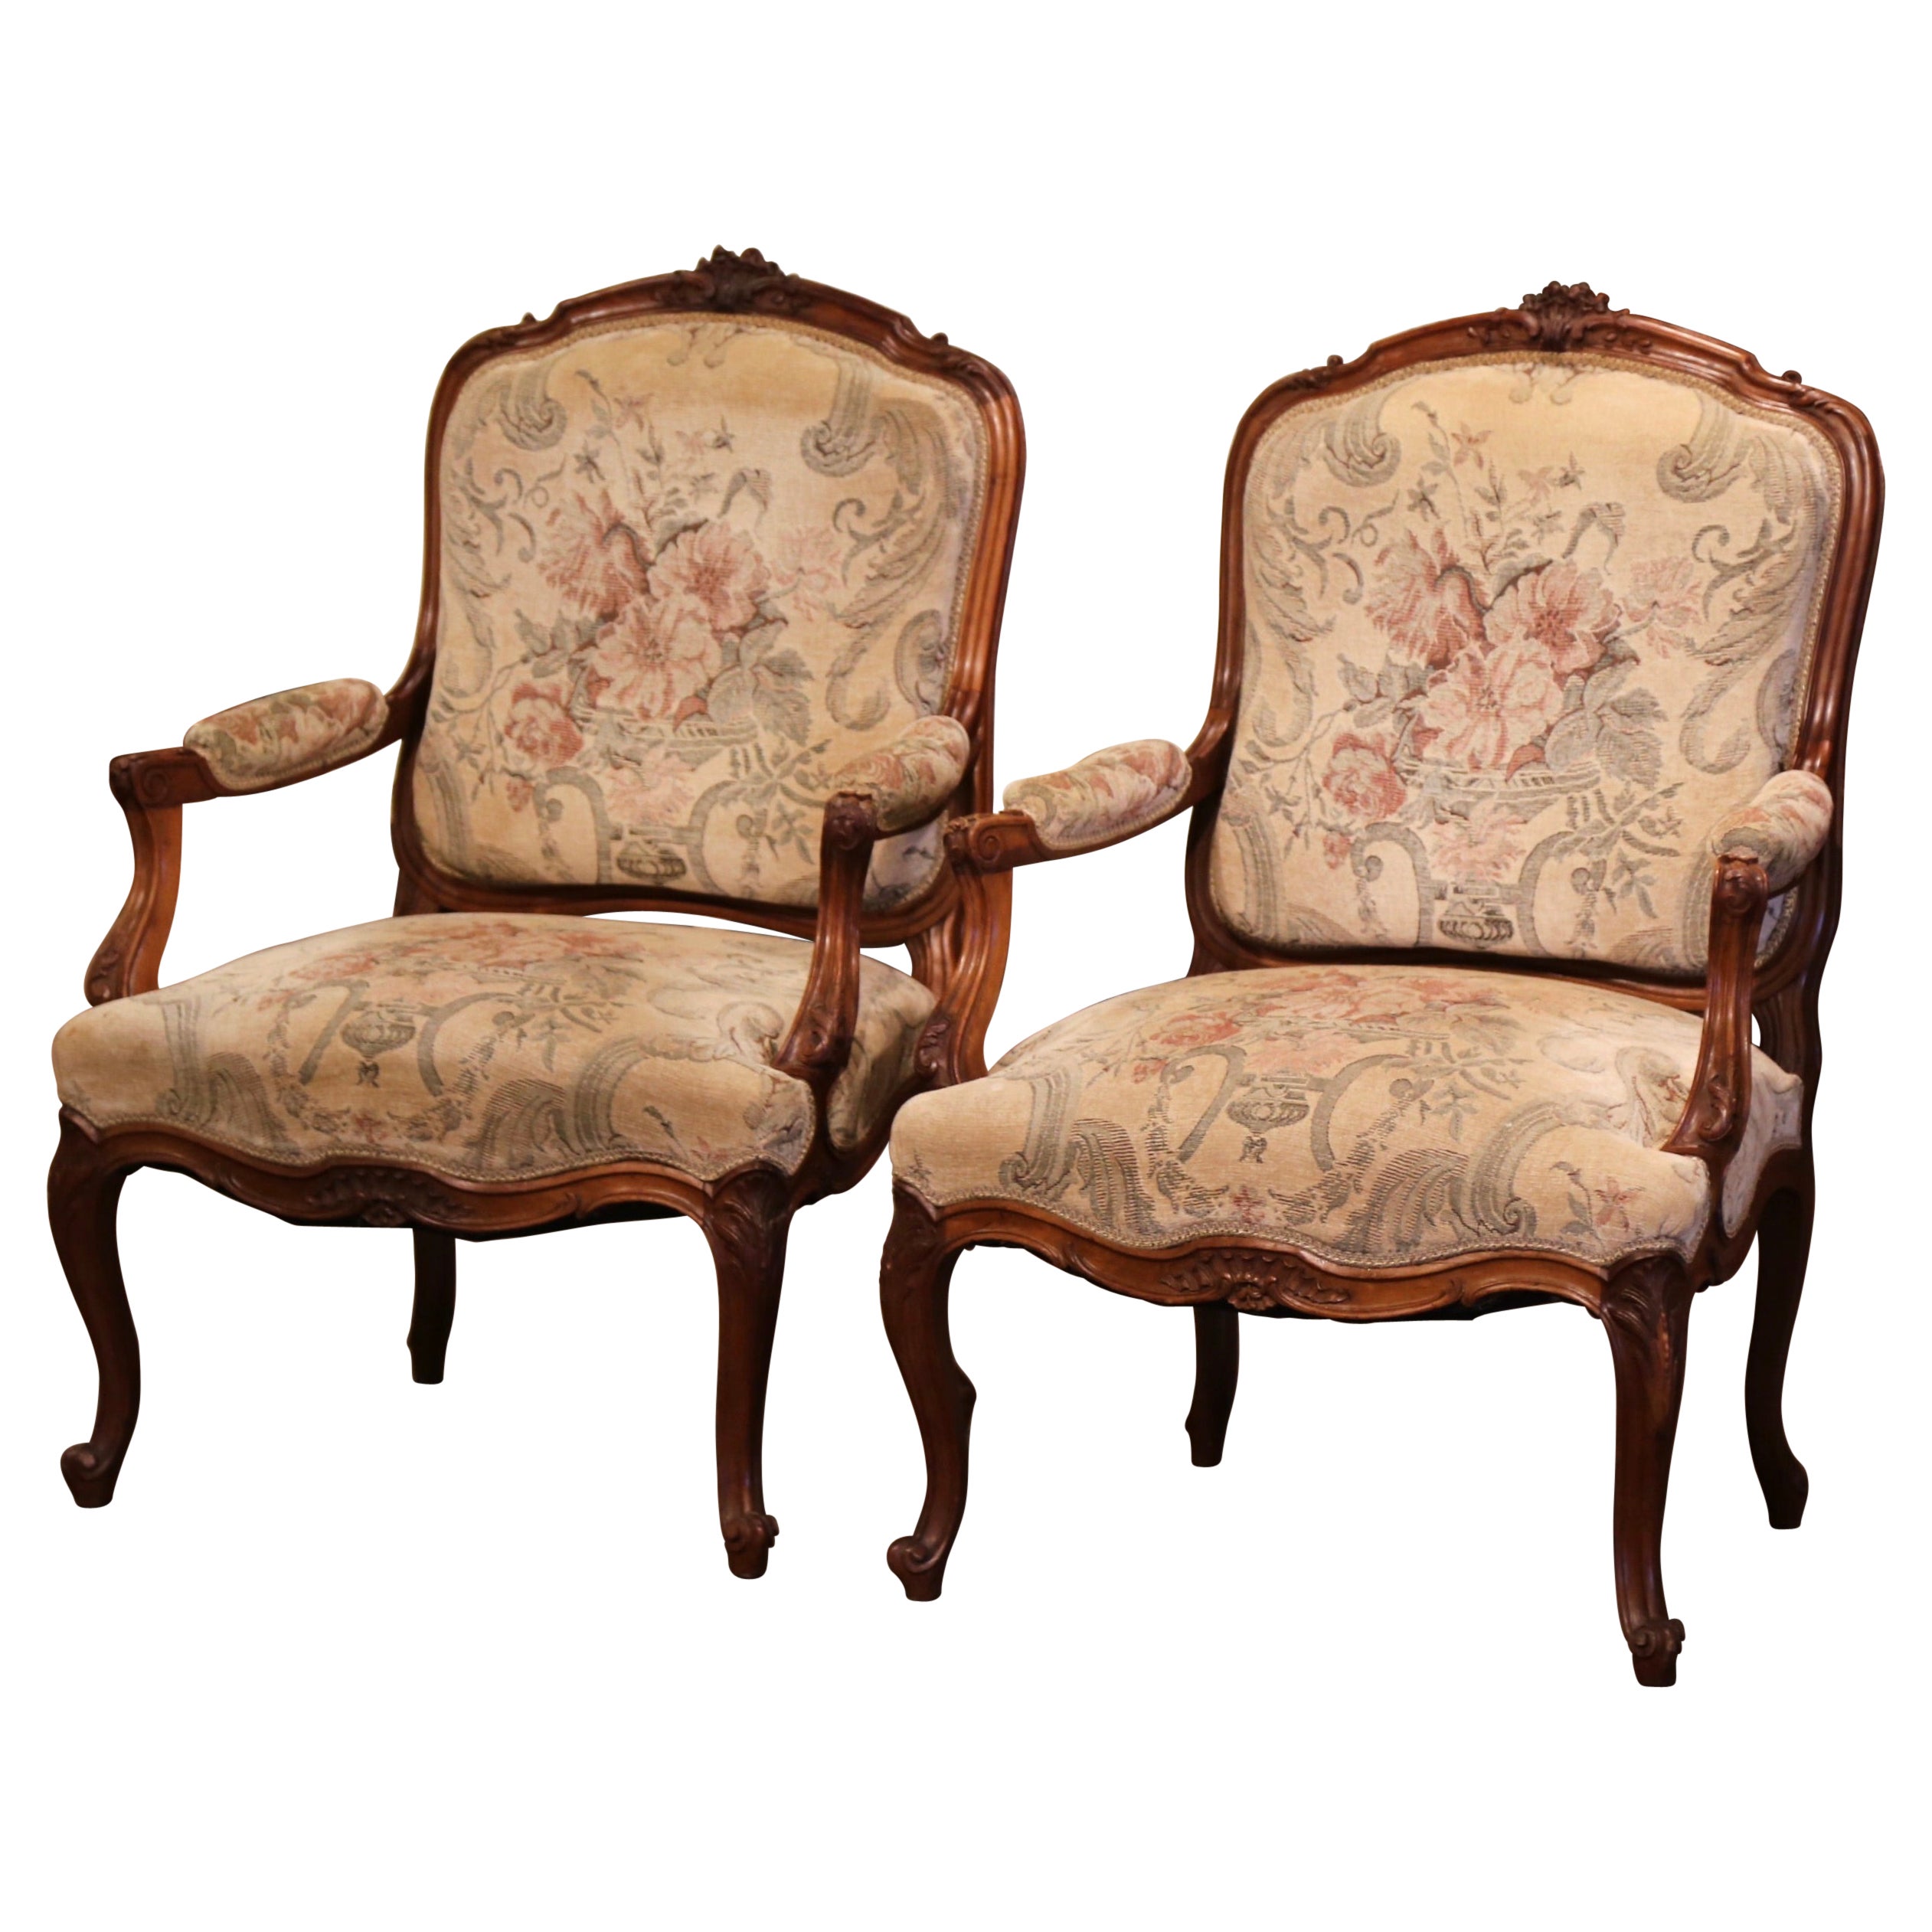 Pair of 19th Century Louis XV Provencal Carved Walnut Upholstered Armchairs